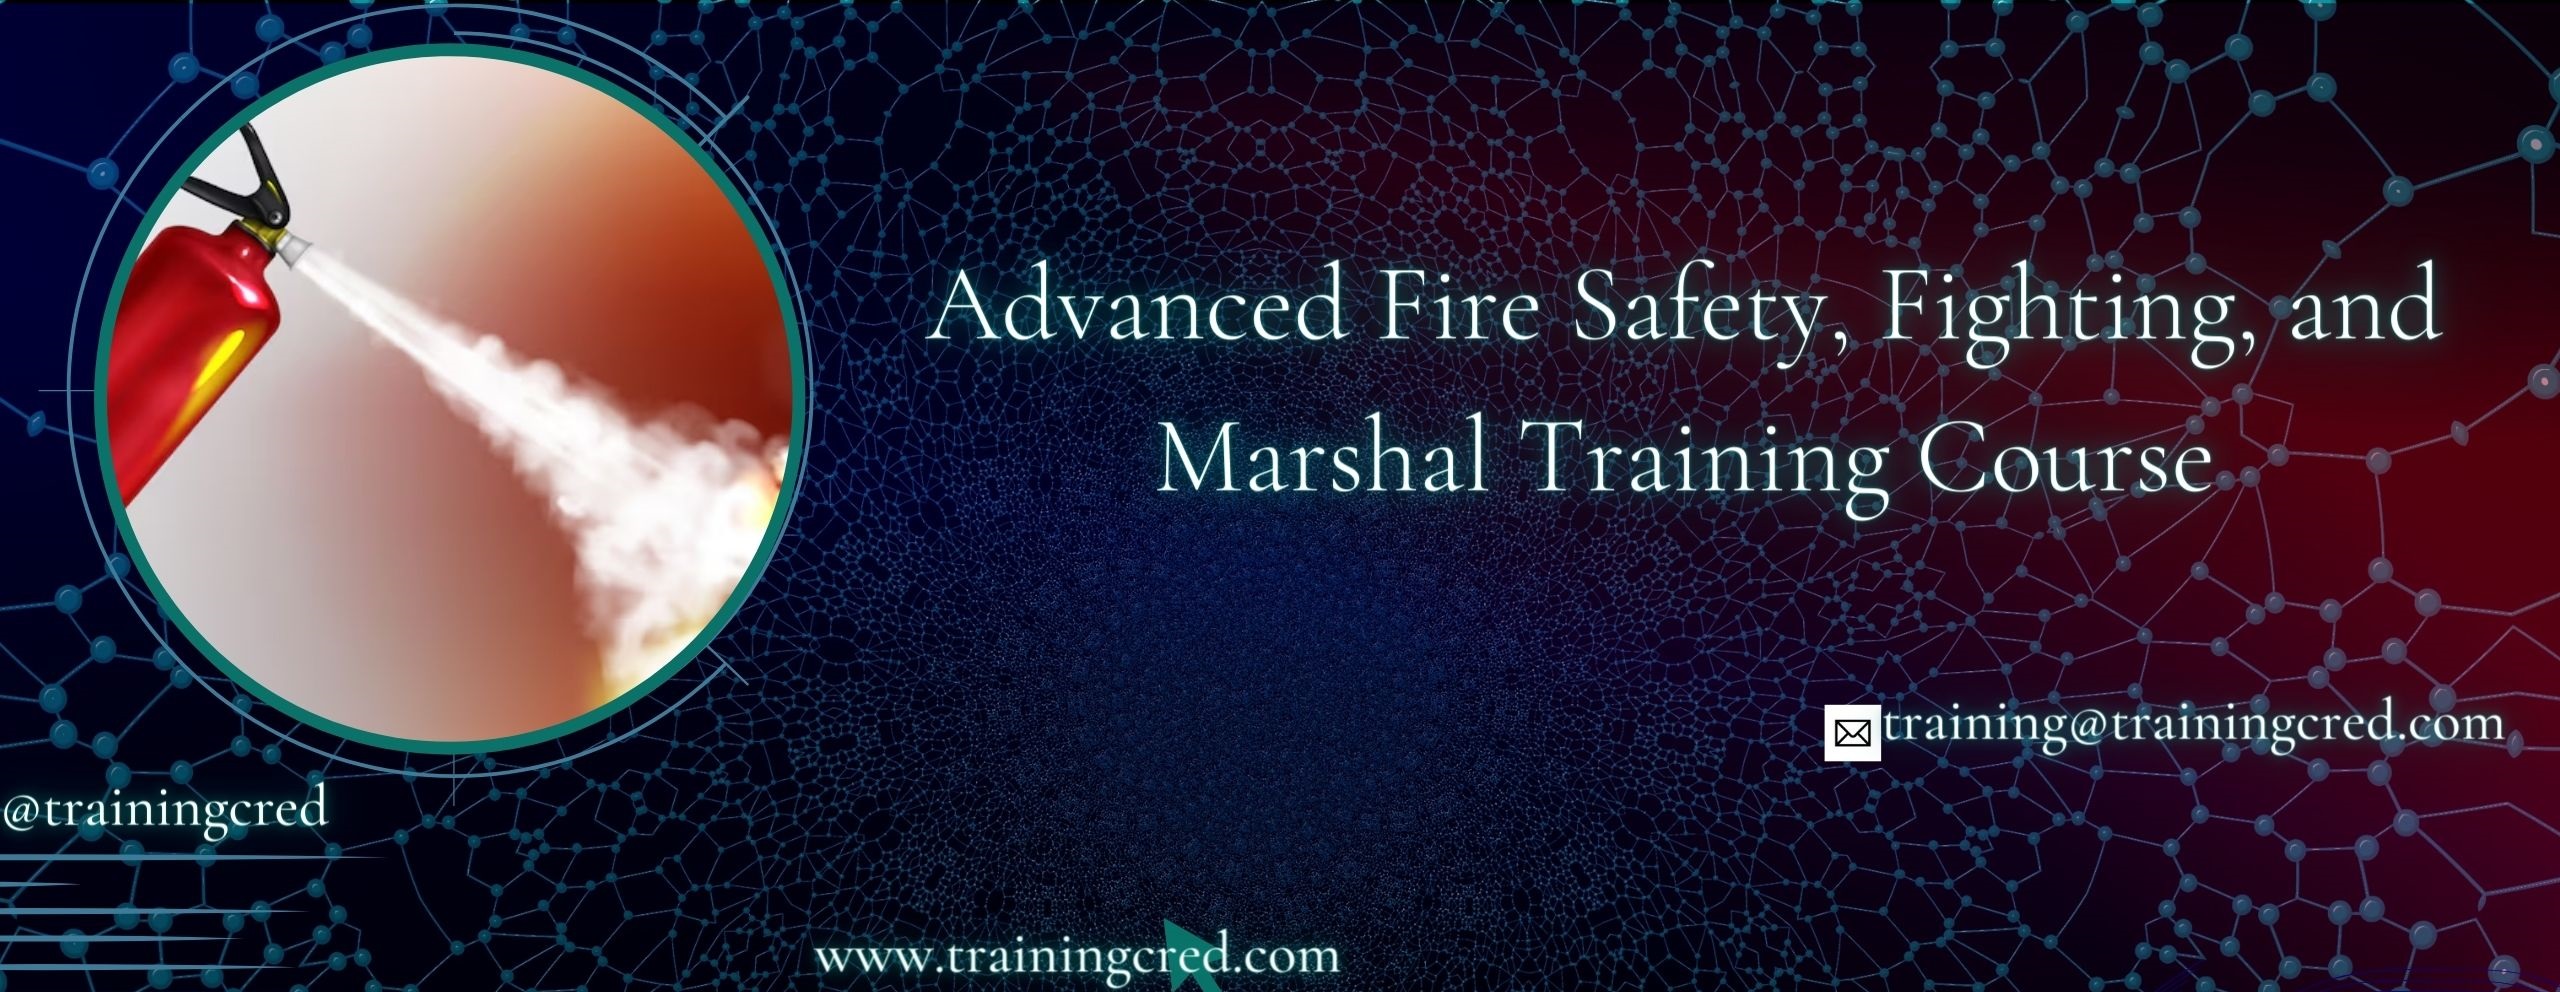 Advanced Fire Safety, Fighting, and Marshal Training